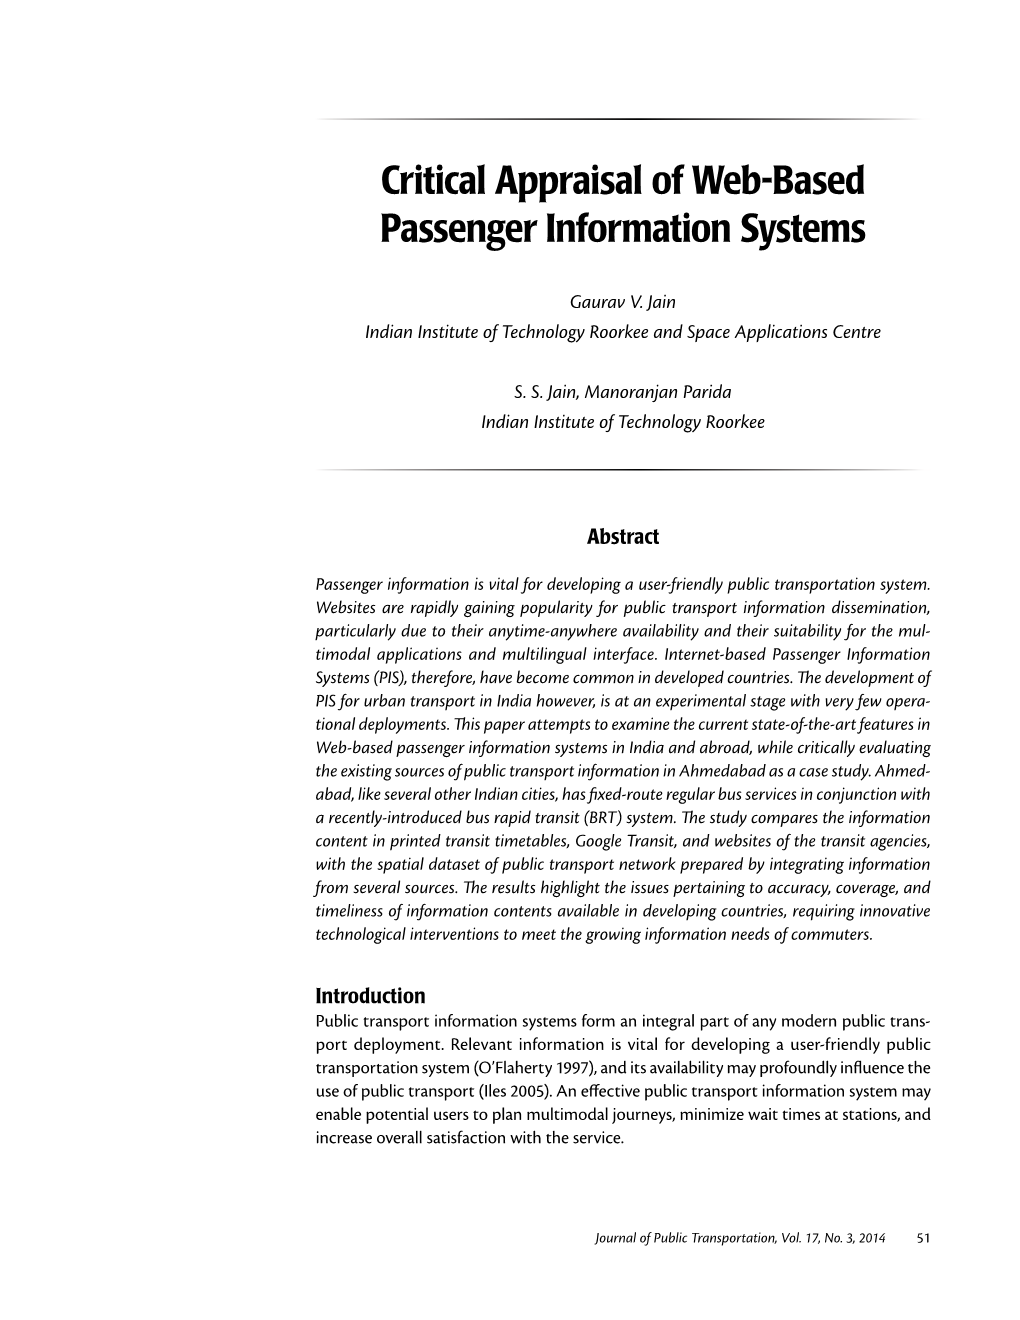 Critical Appraisal of Web-Based Passenger Information Systems